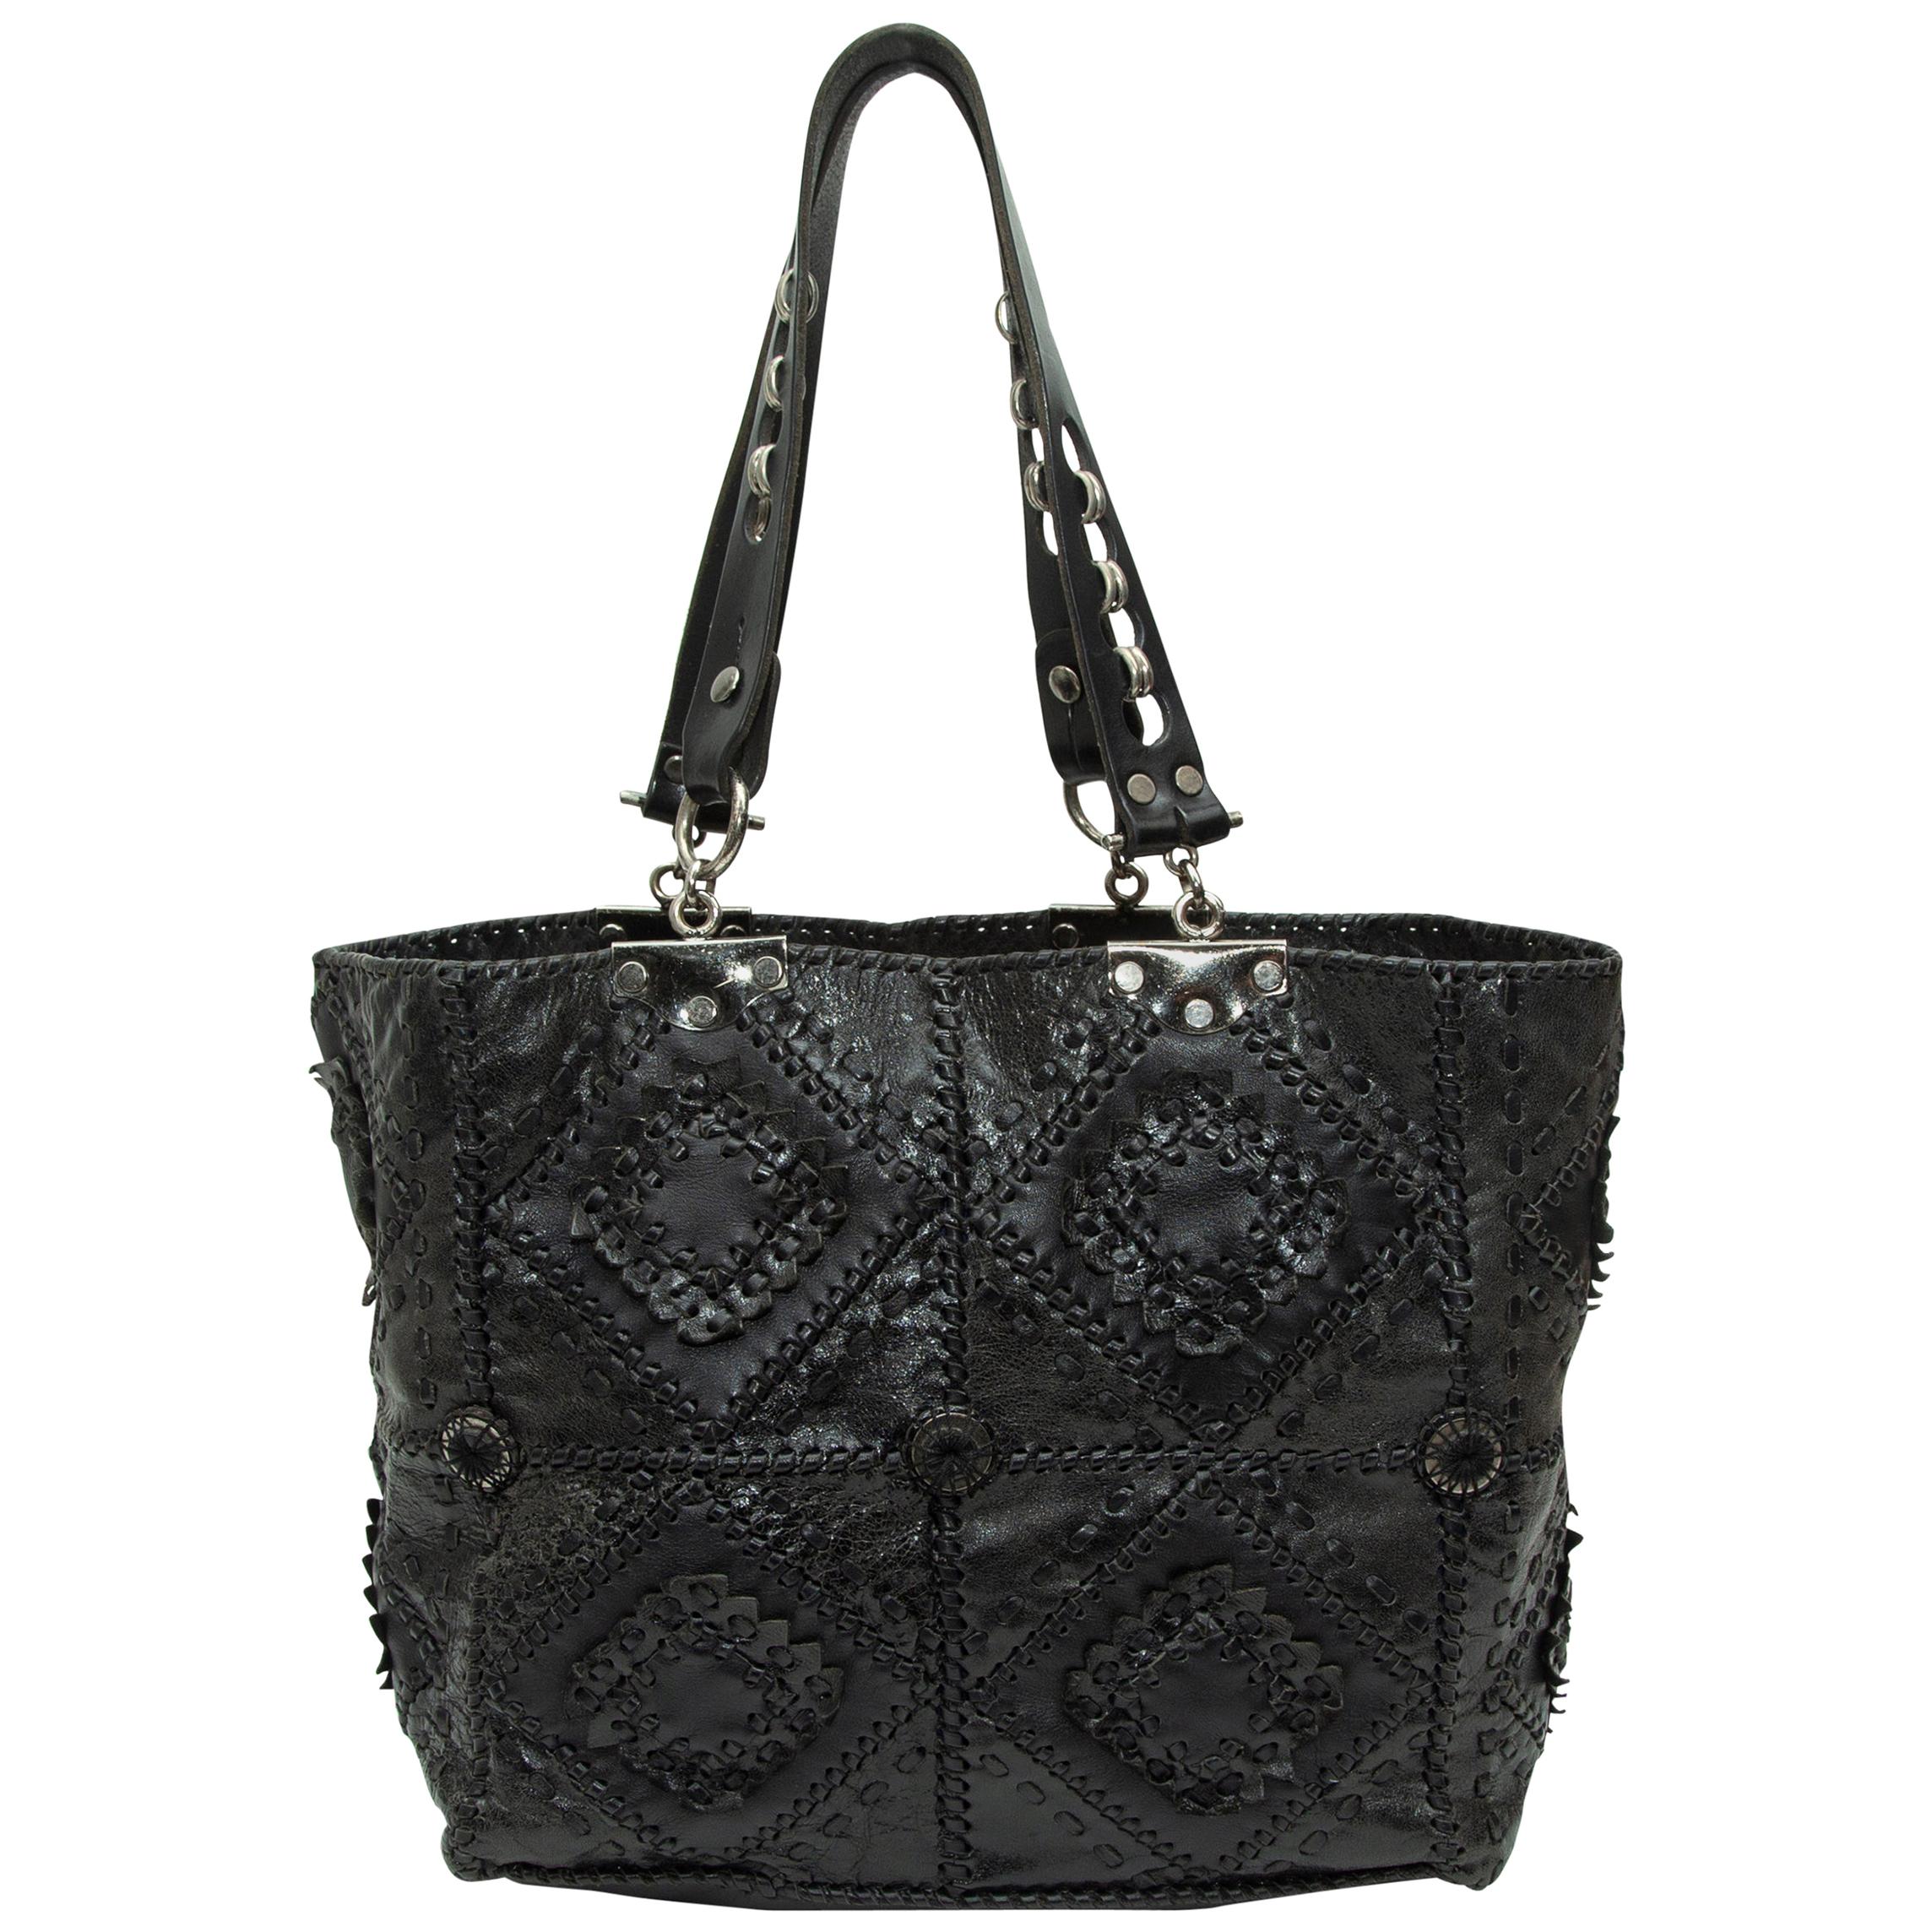 Jamin Puech Black Patchwork Leather Tote Bag